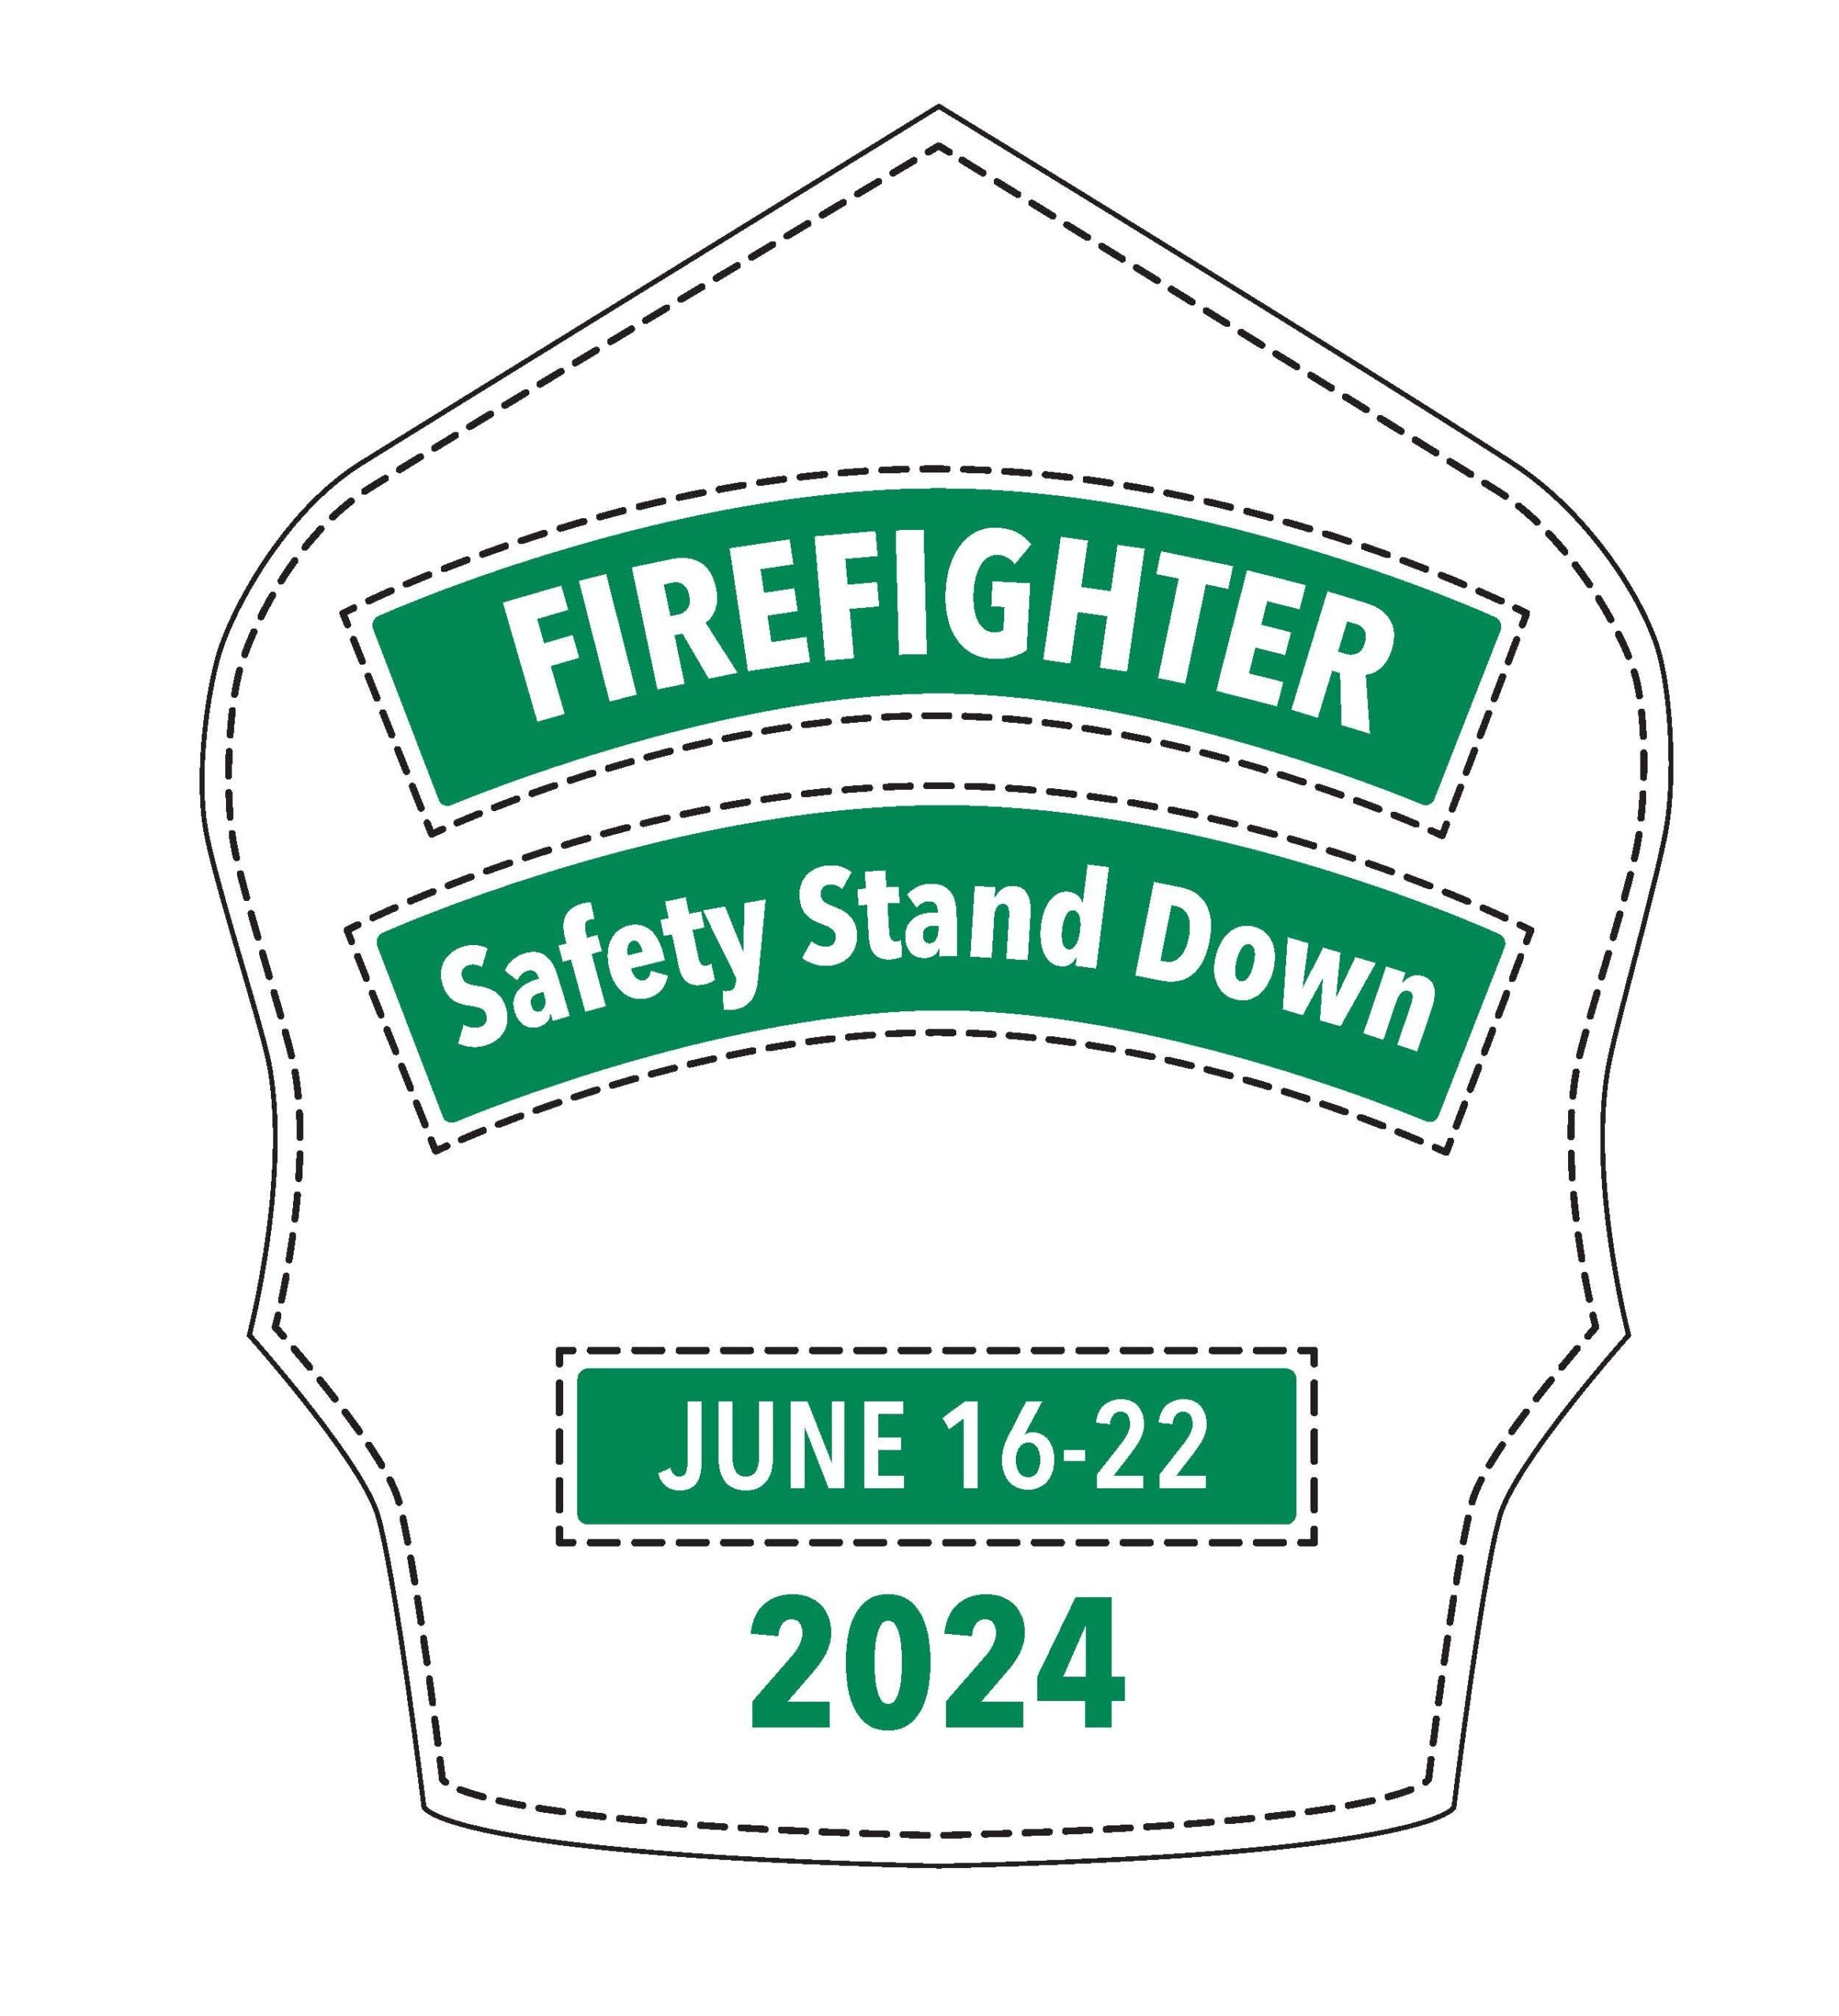 Safety Stand Down home